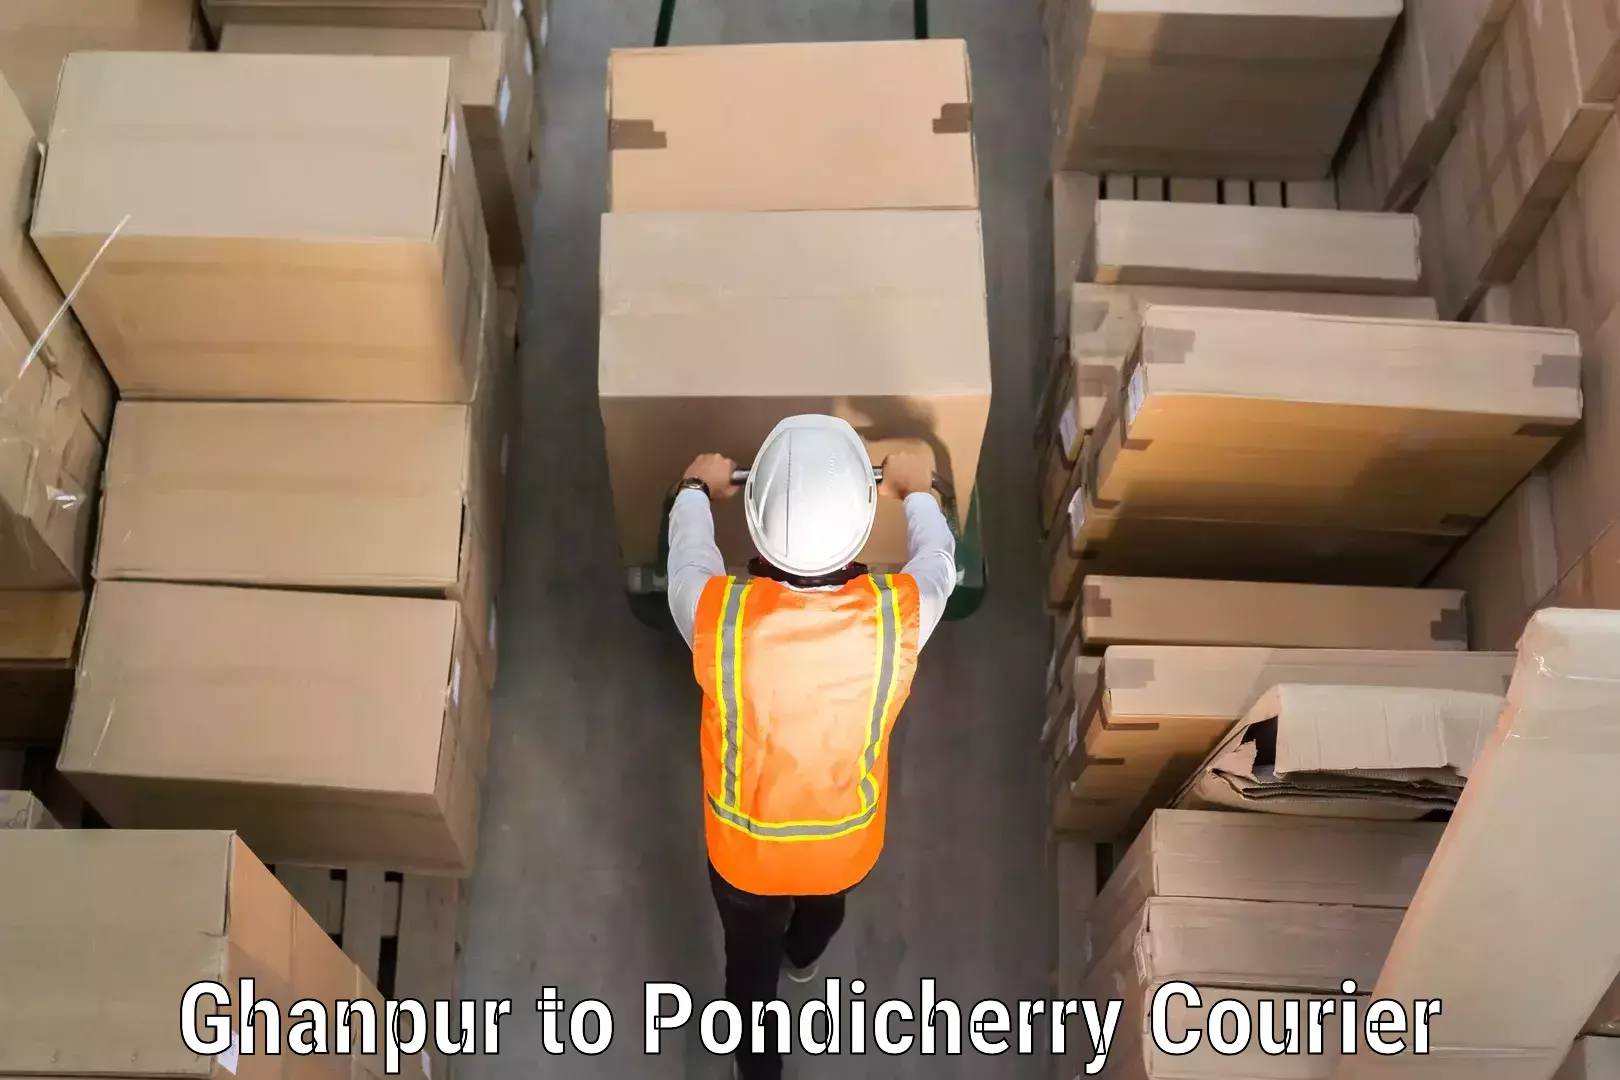 Luggage transport service Ghanpur to Pondicherry